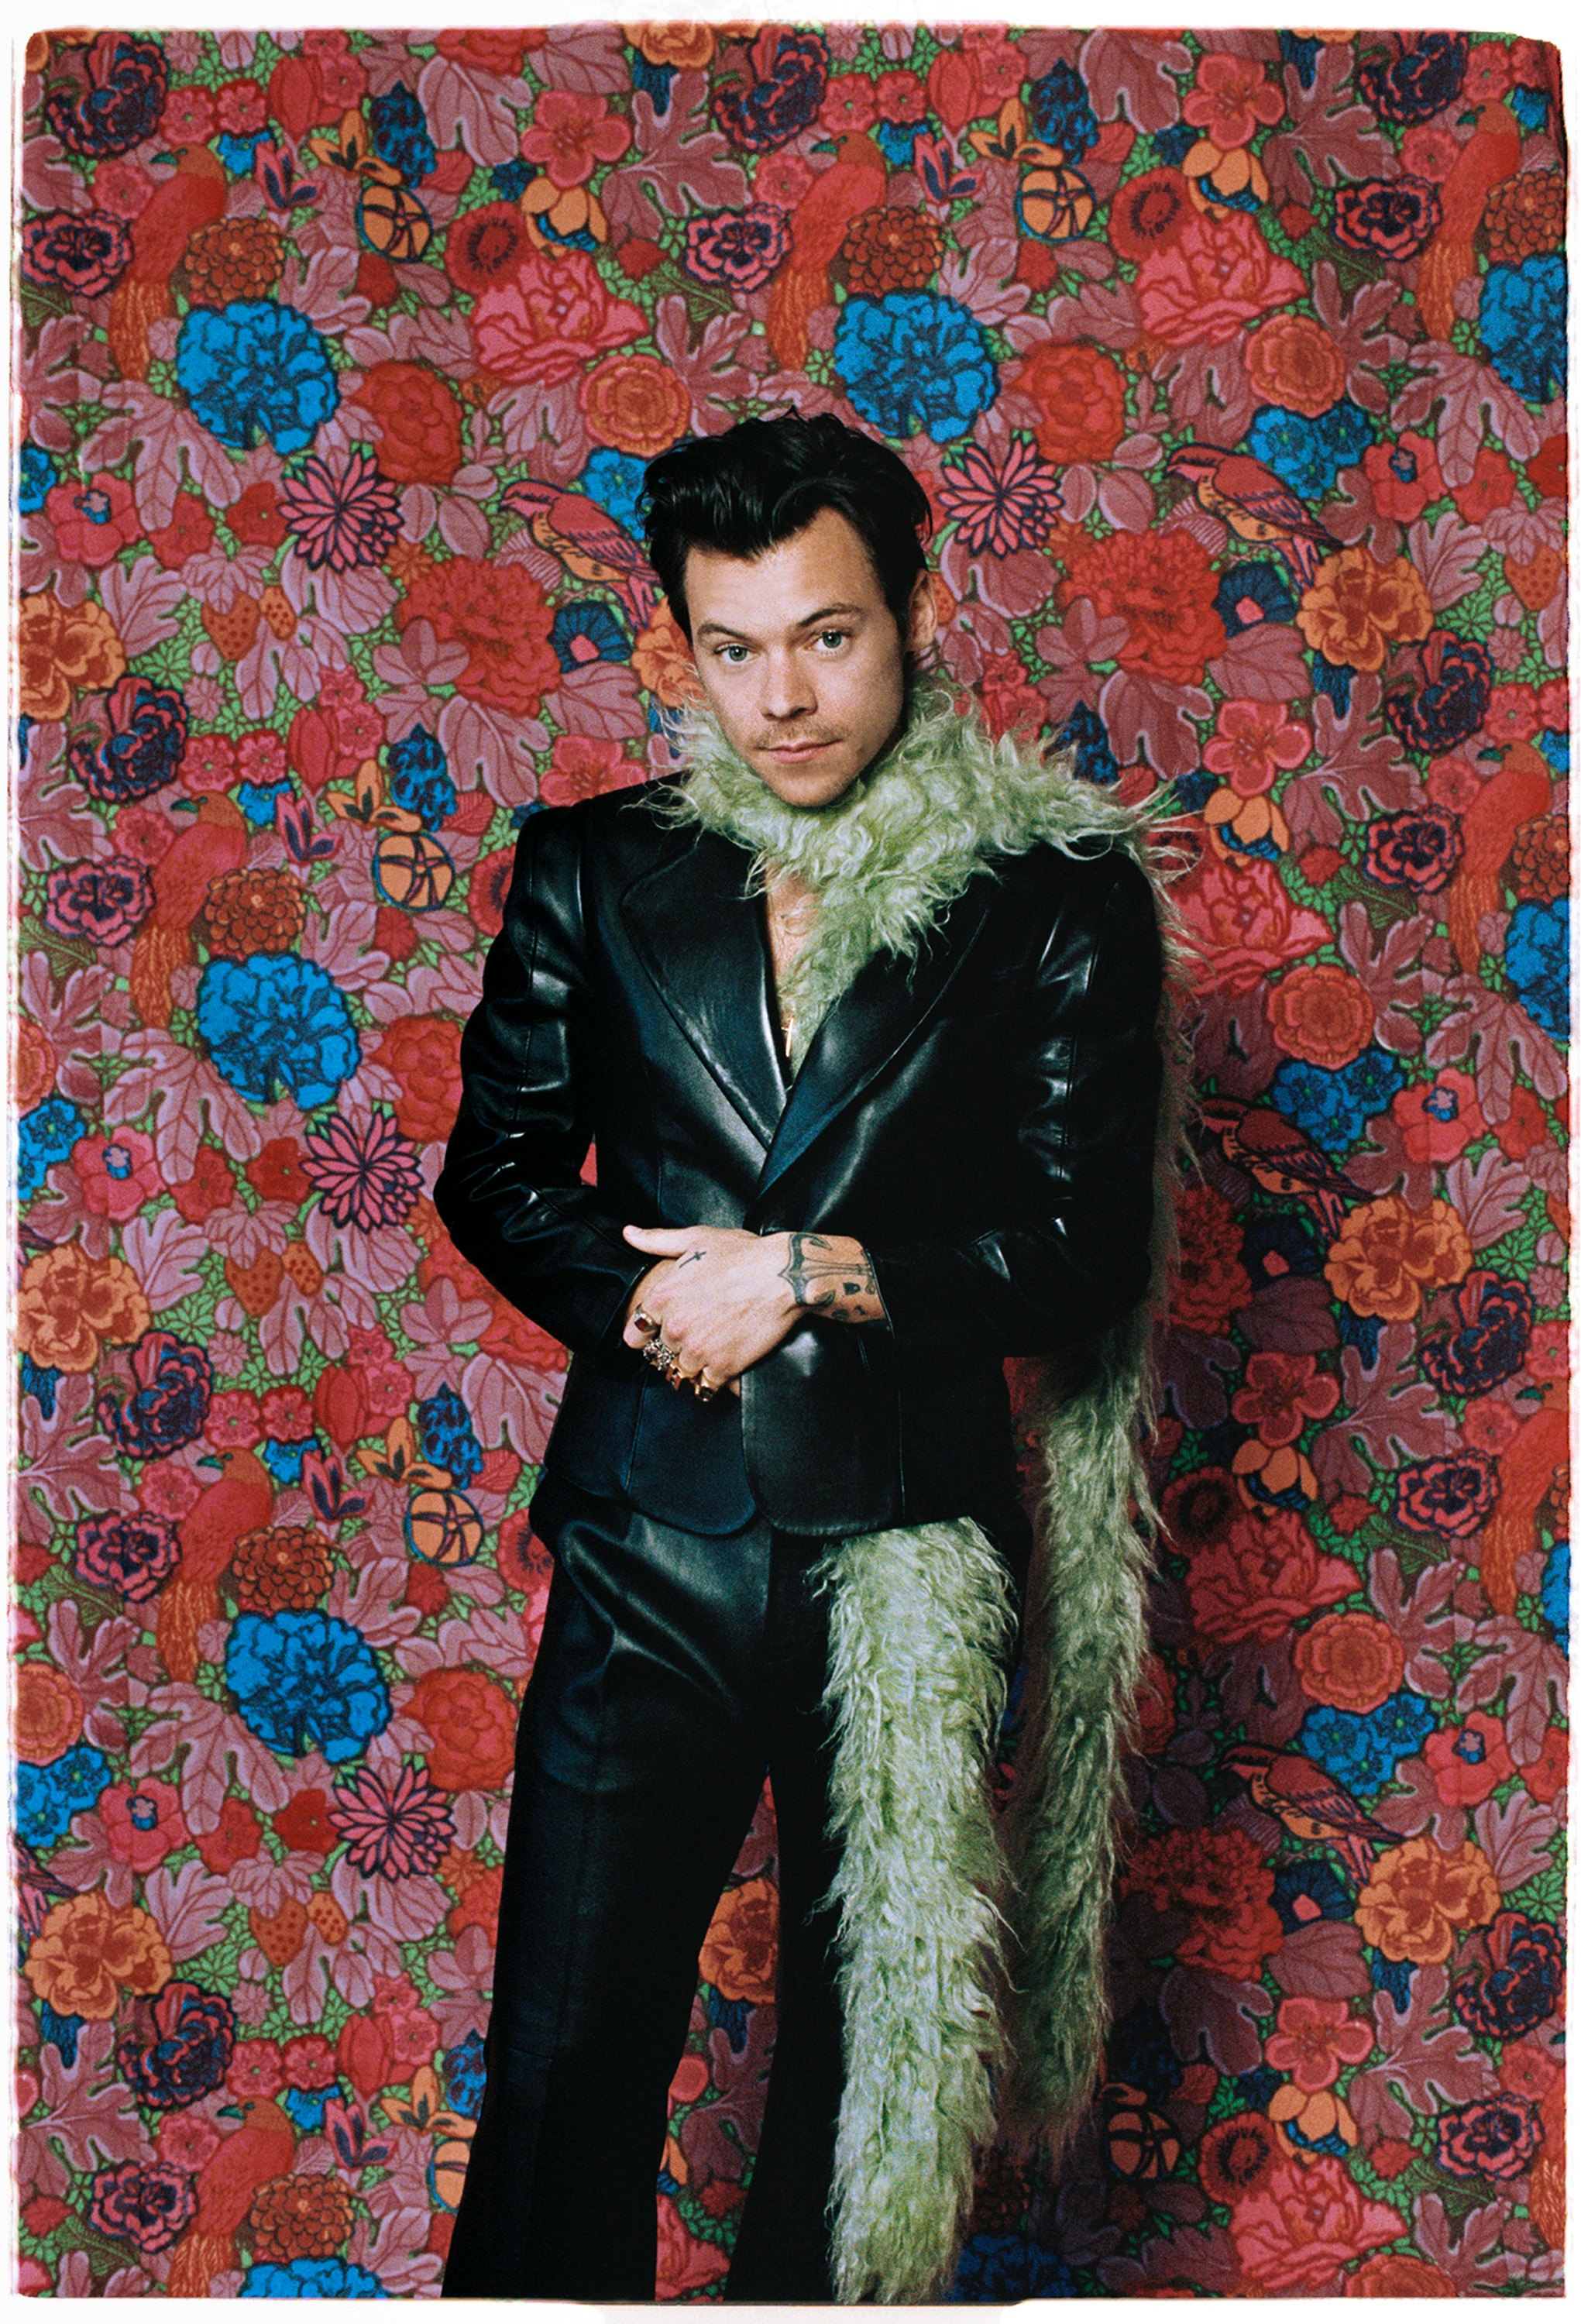 Harry Styles Is Impressed With, and Inspired By, Shania Twain